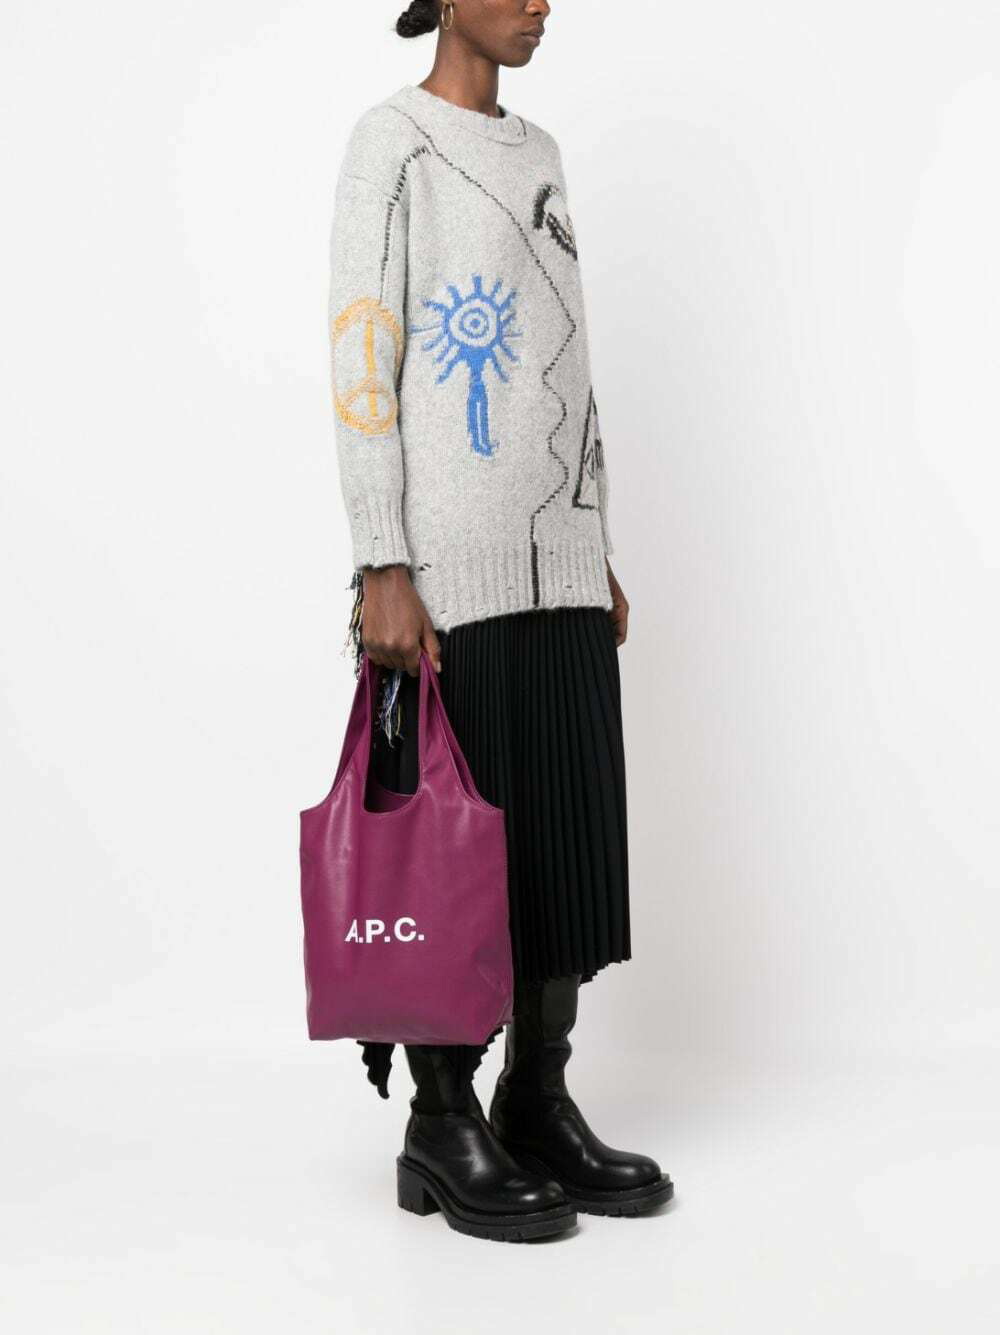 A.P.C. Ninon Small Tote Bag in Pink